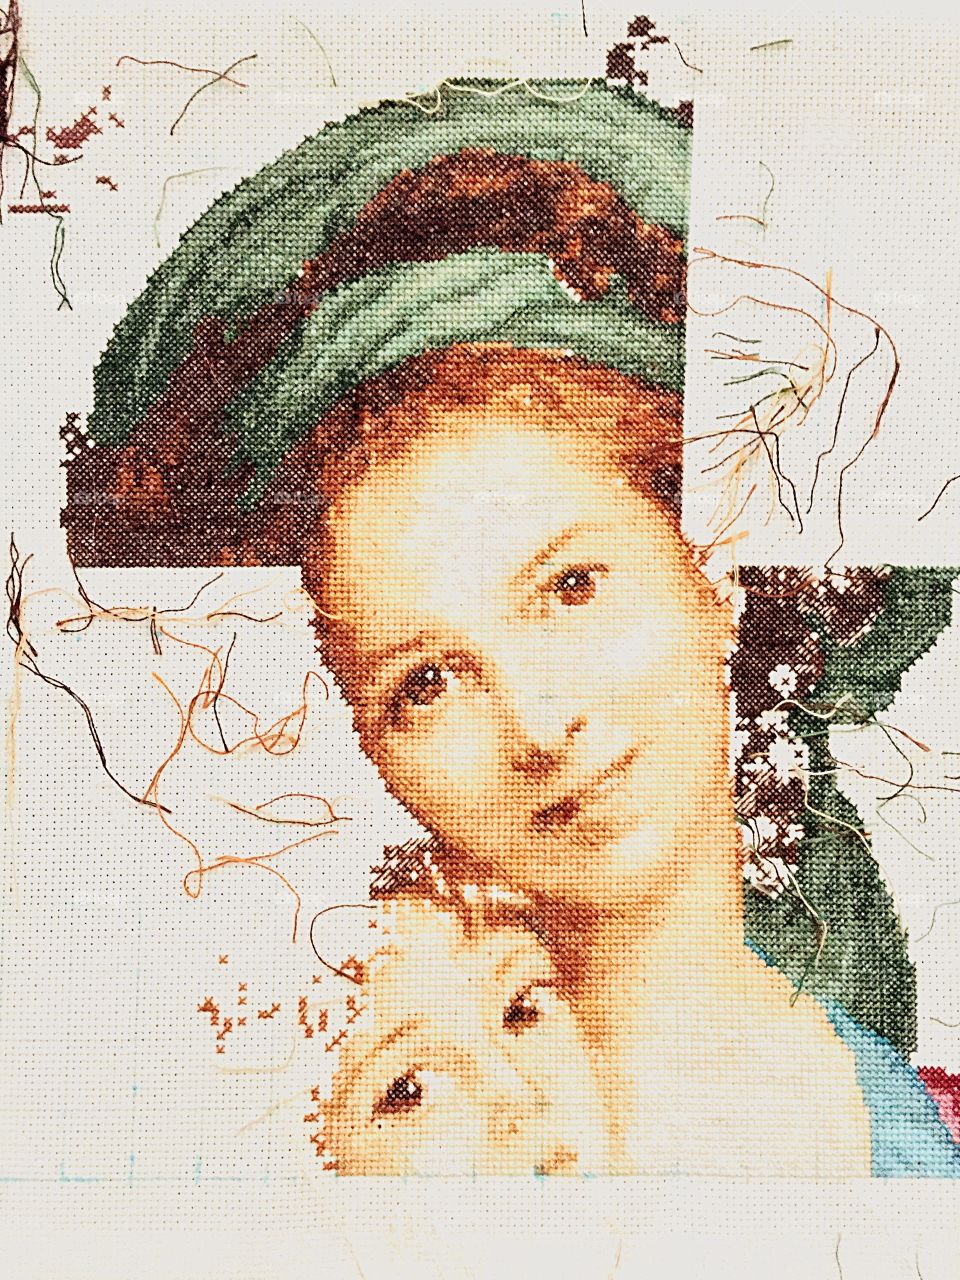 Embroidery of woman with child